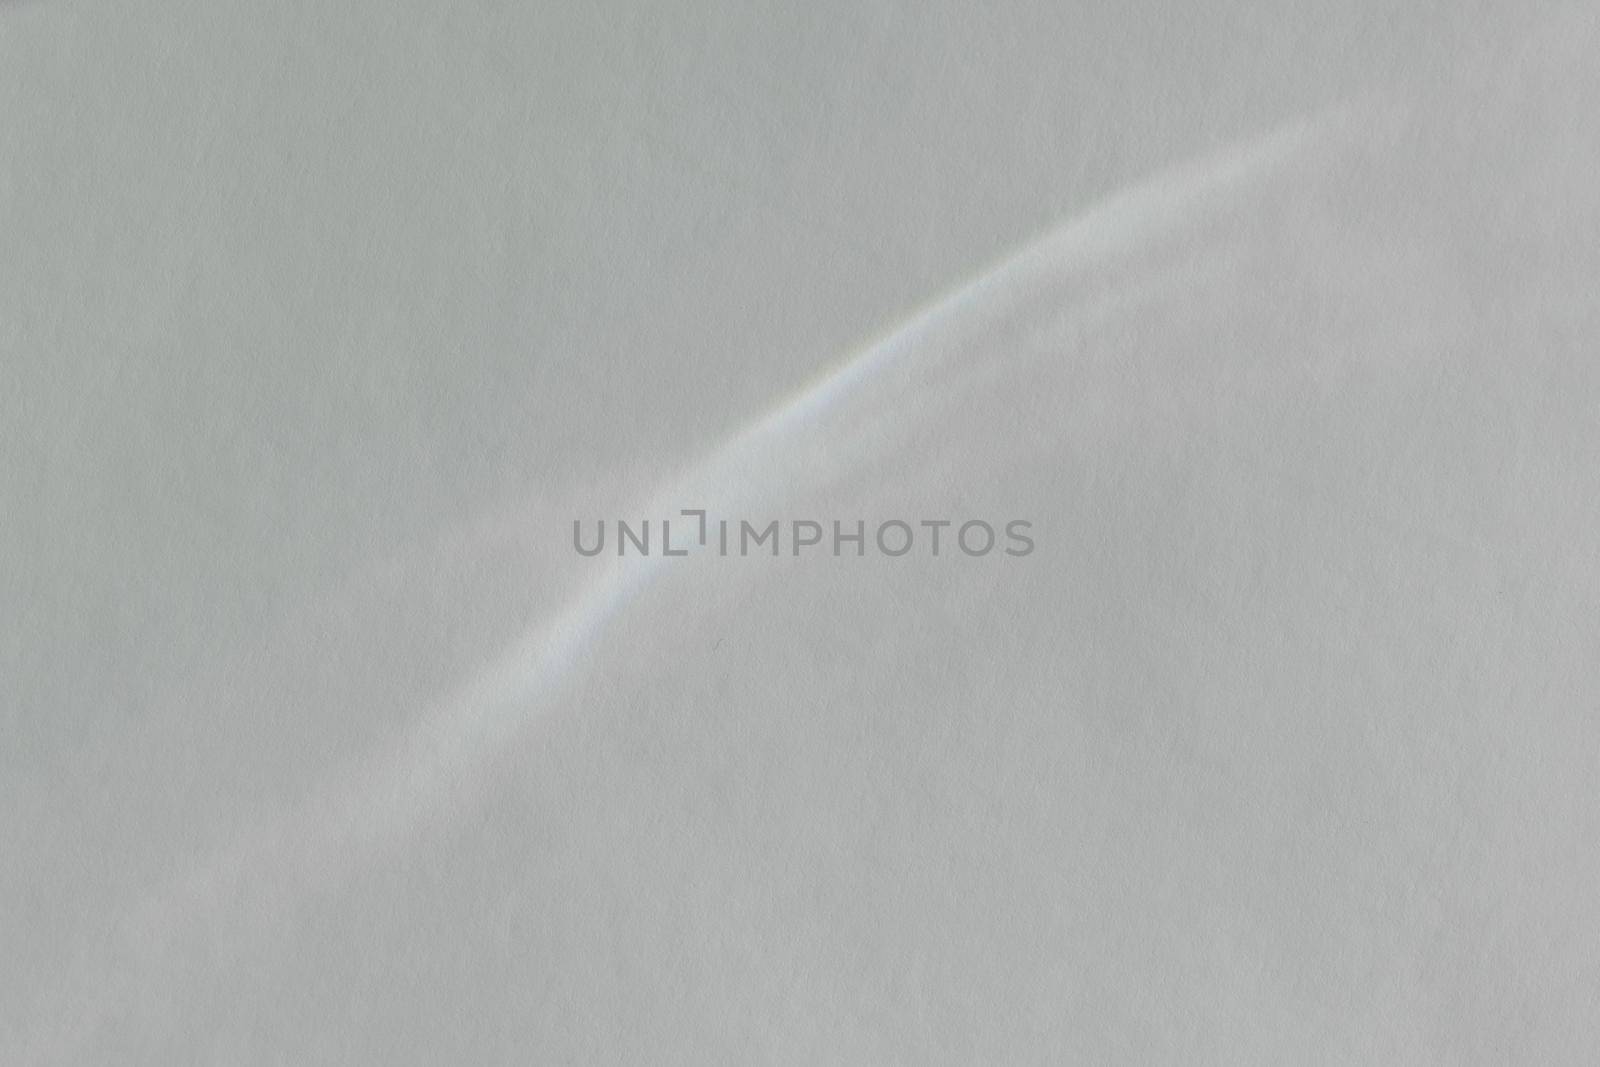 Caustic effect light refraction on white wall overlay photo mockup, blurred sun rays refracting through glass prism with shadow. Abstract natural light refraction silhouette on water surface by photolime